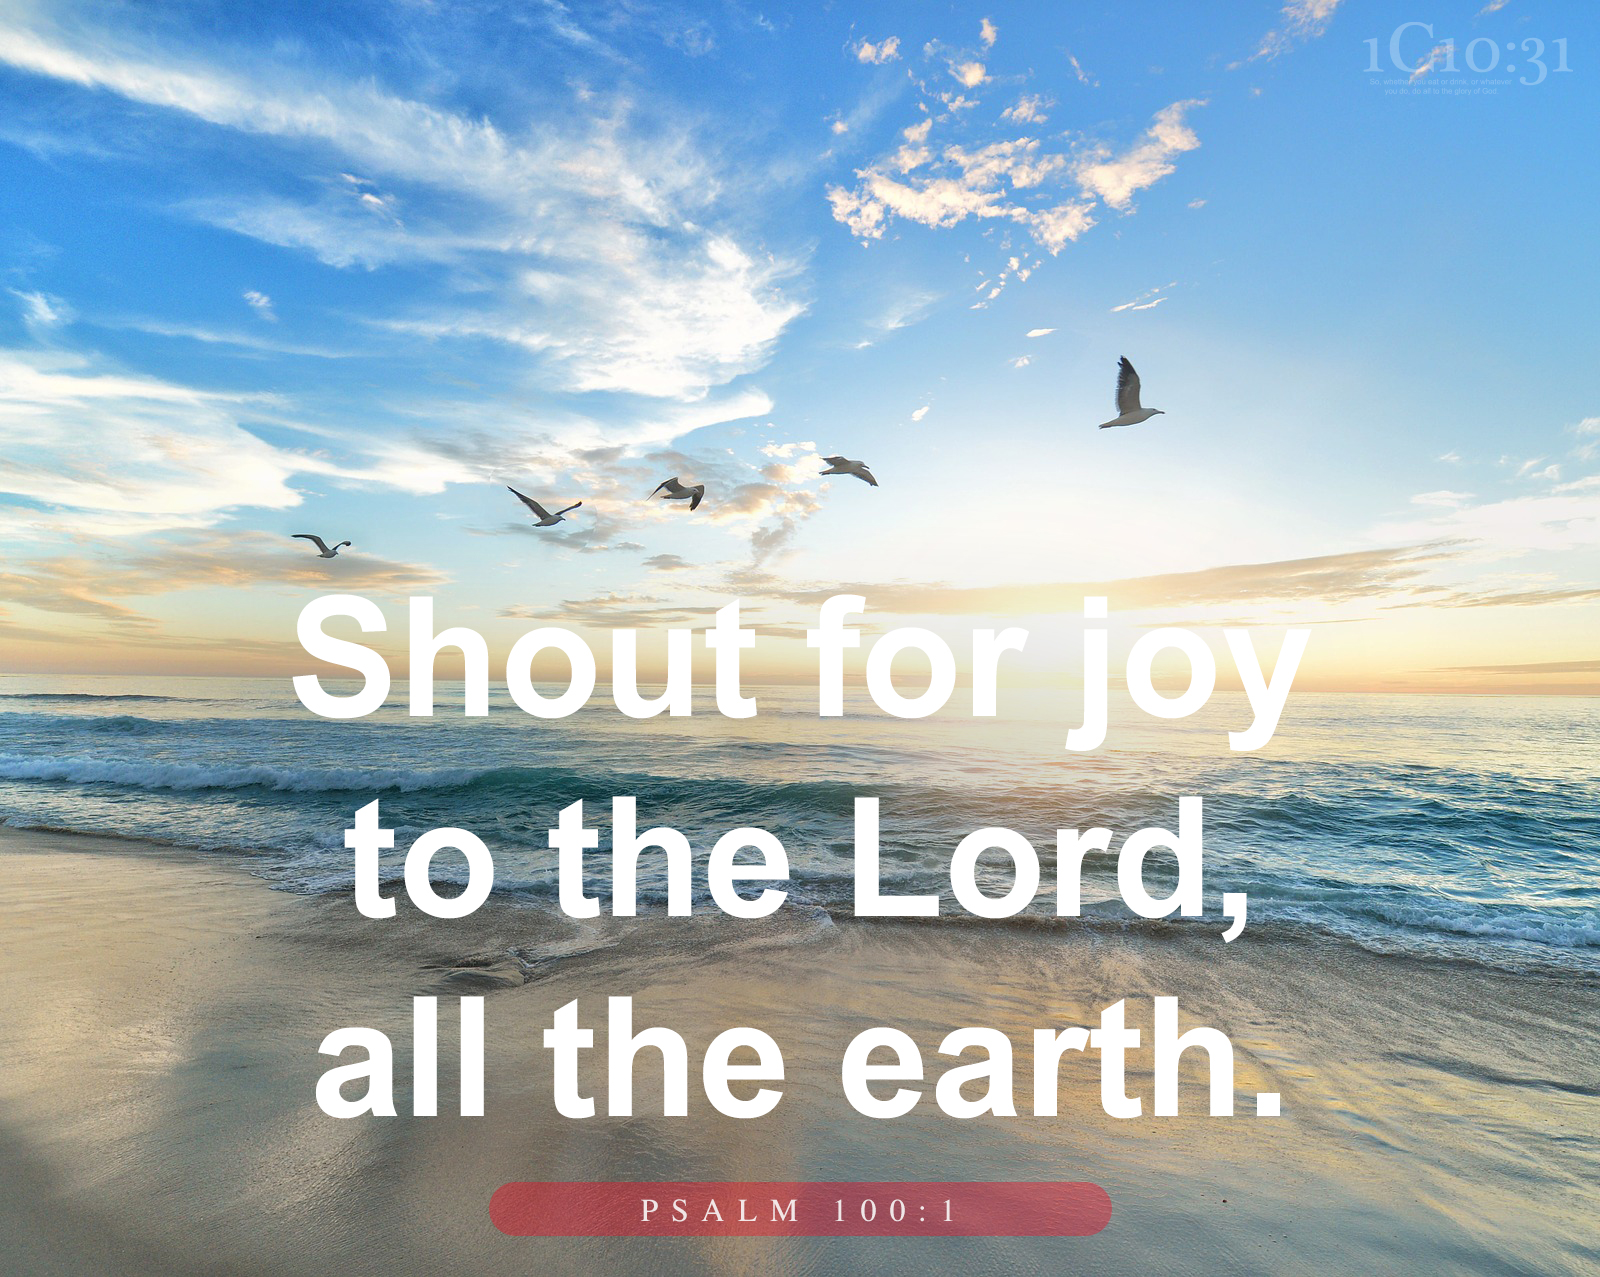 Shout for joy to the Lord, all the earth. Psalm 100:1